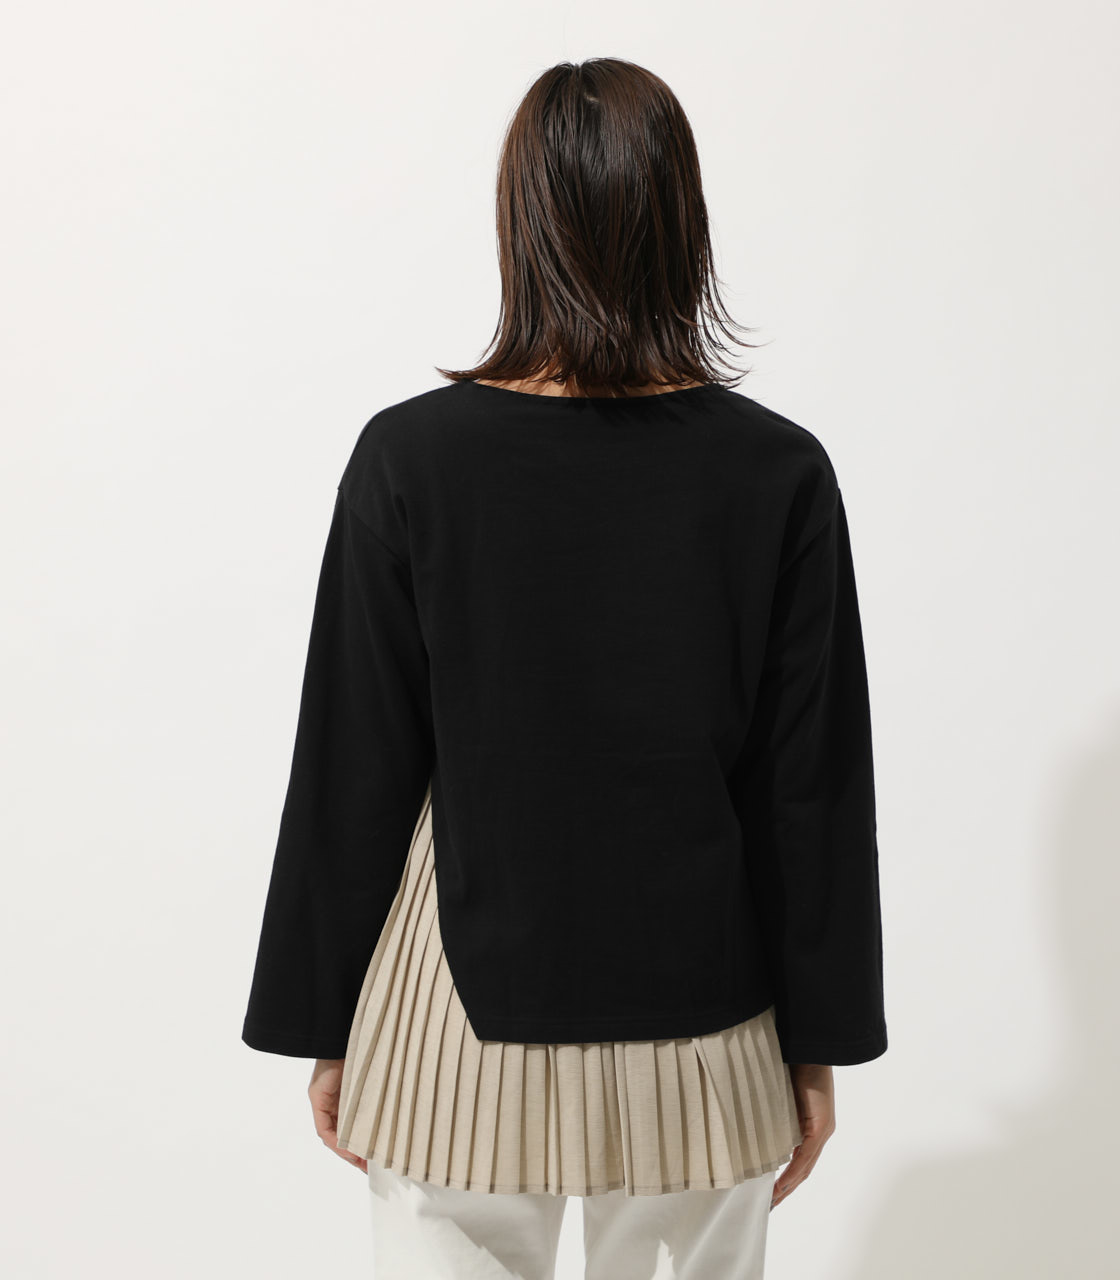 LAYER PLEATS COMBI TOP/レイヤードプリーツコンビトップ 詳細画像 柄BLK 6